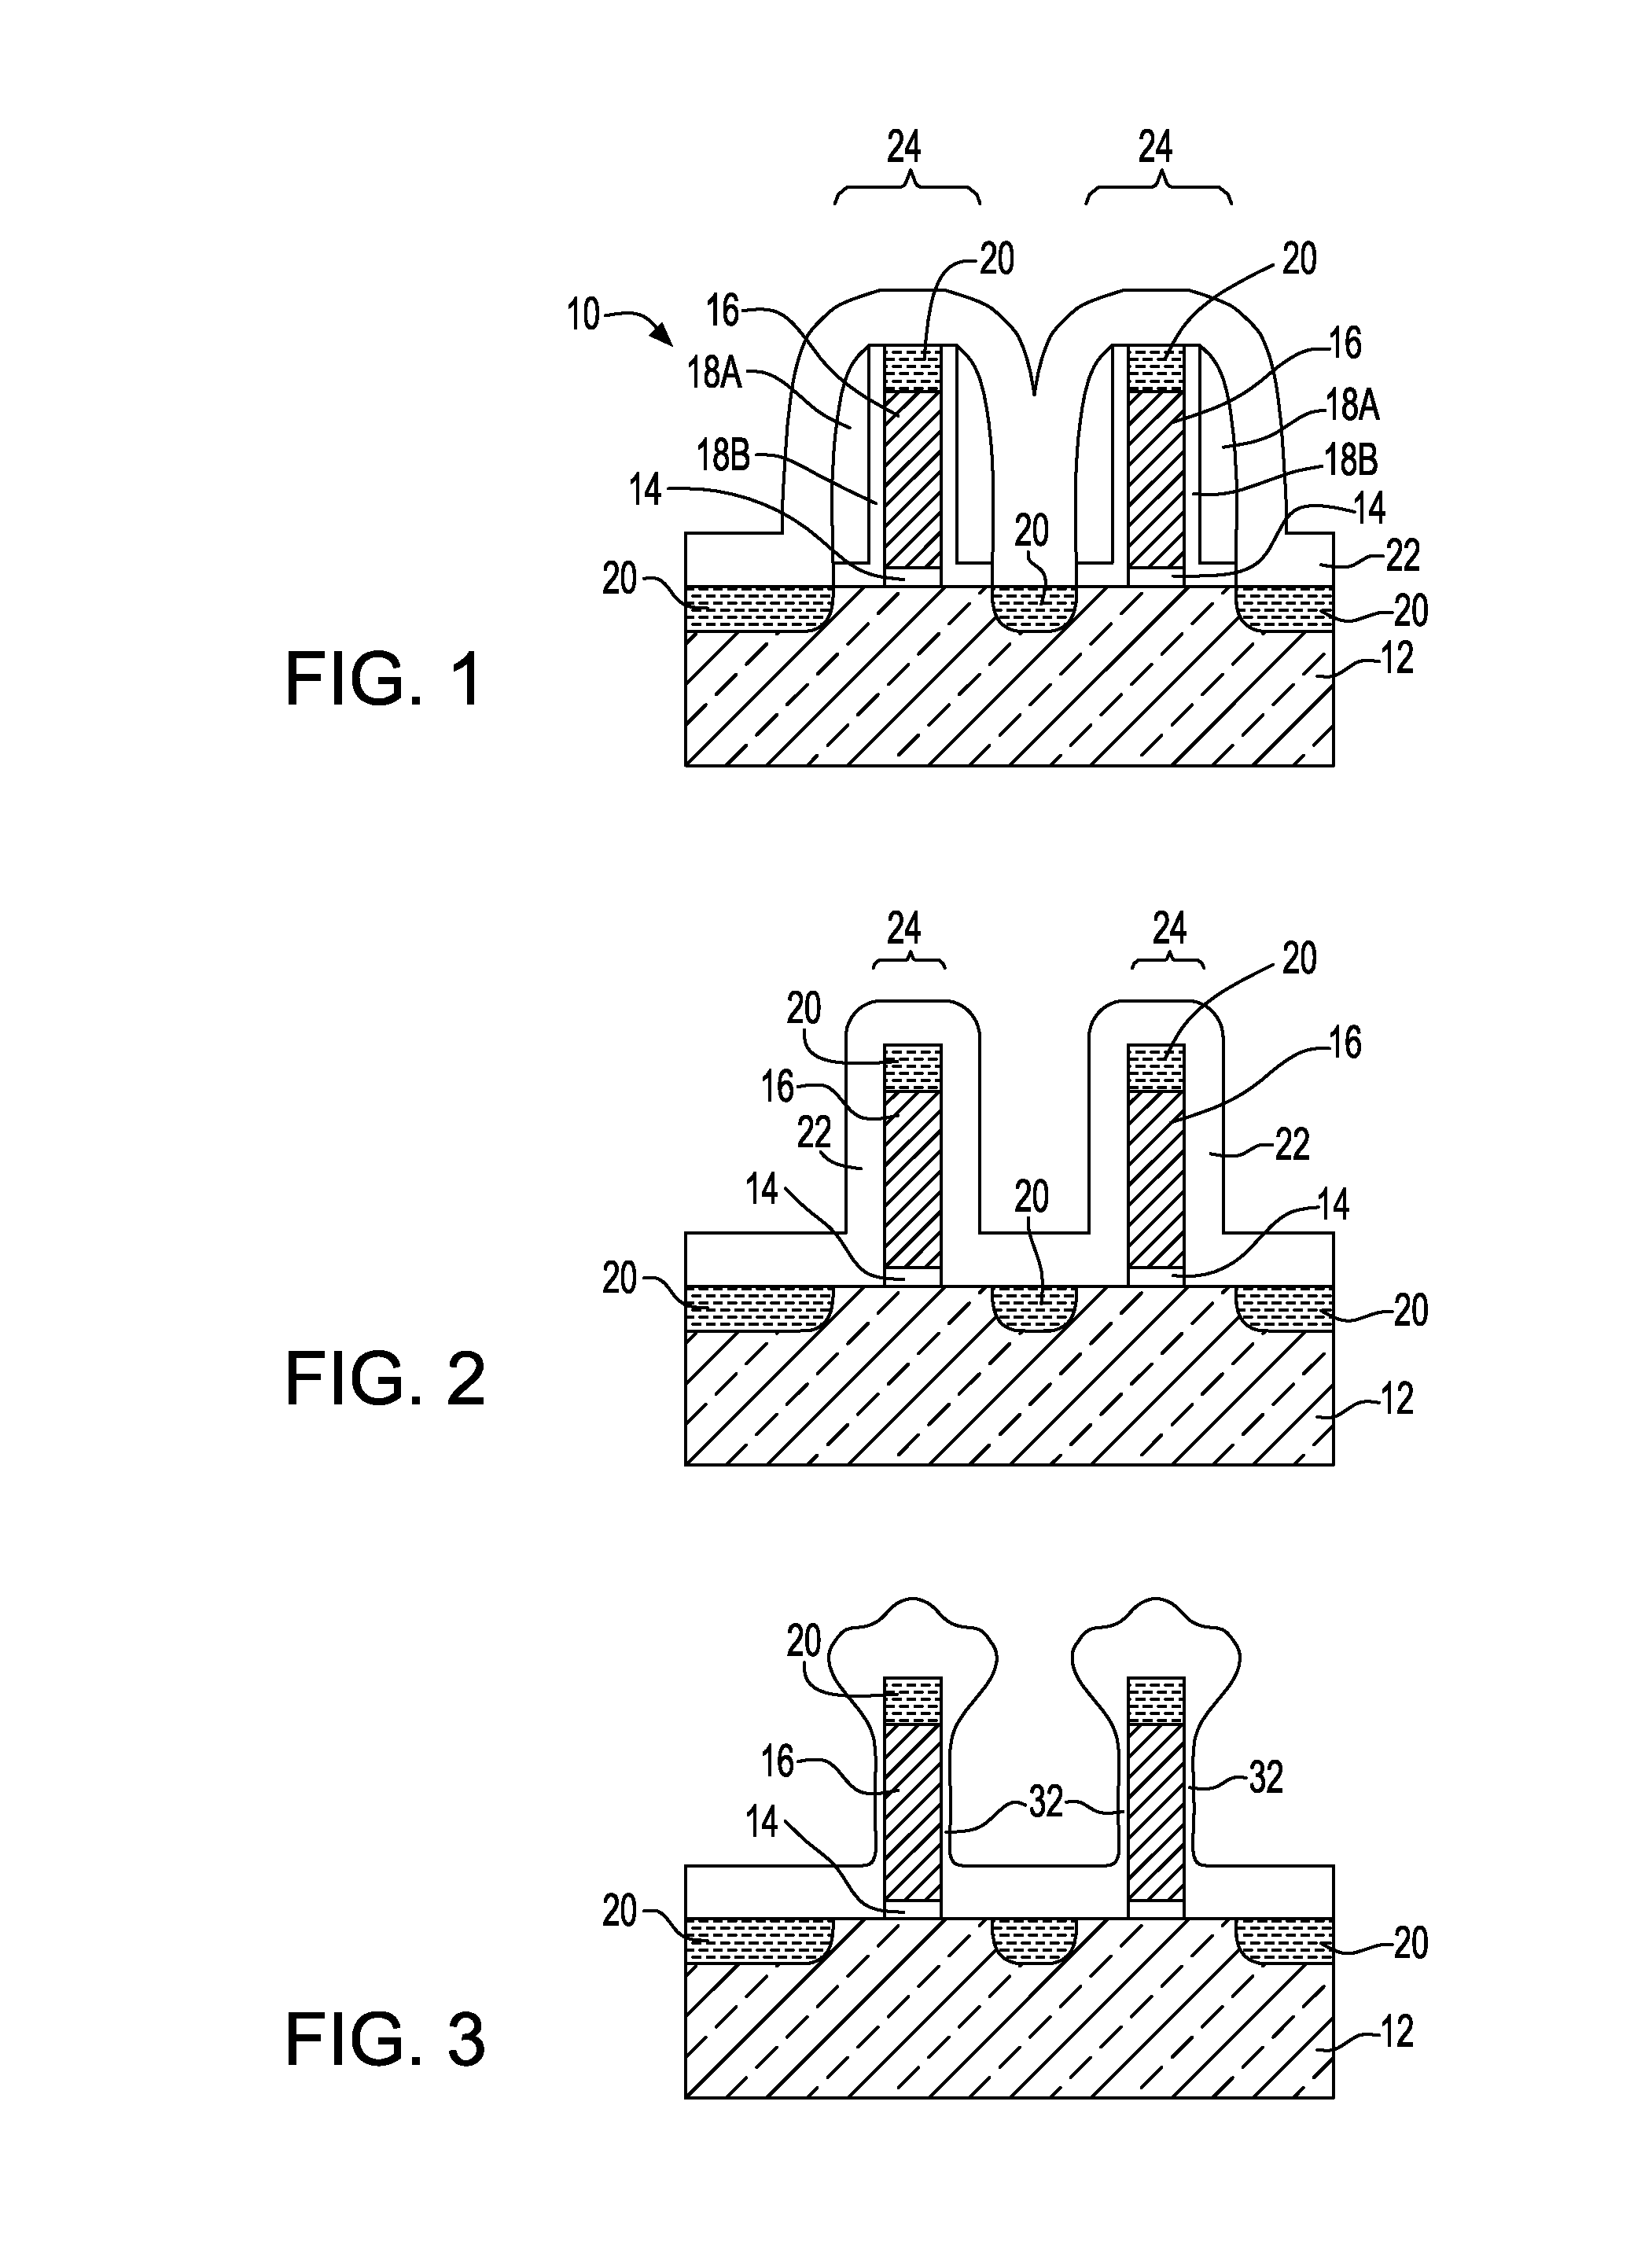 Non-conformal stress liner for enhanced mosfet performance